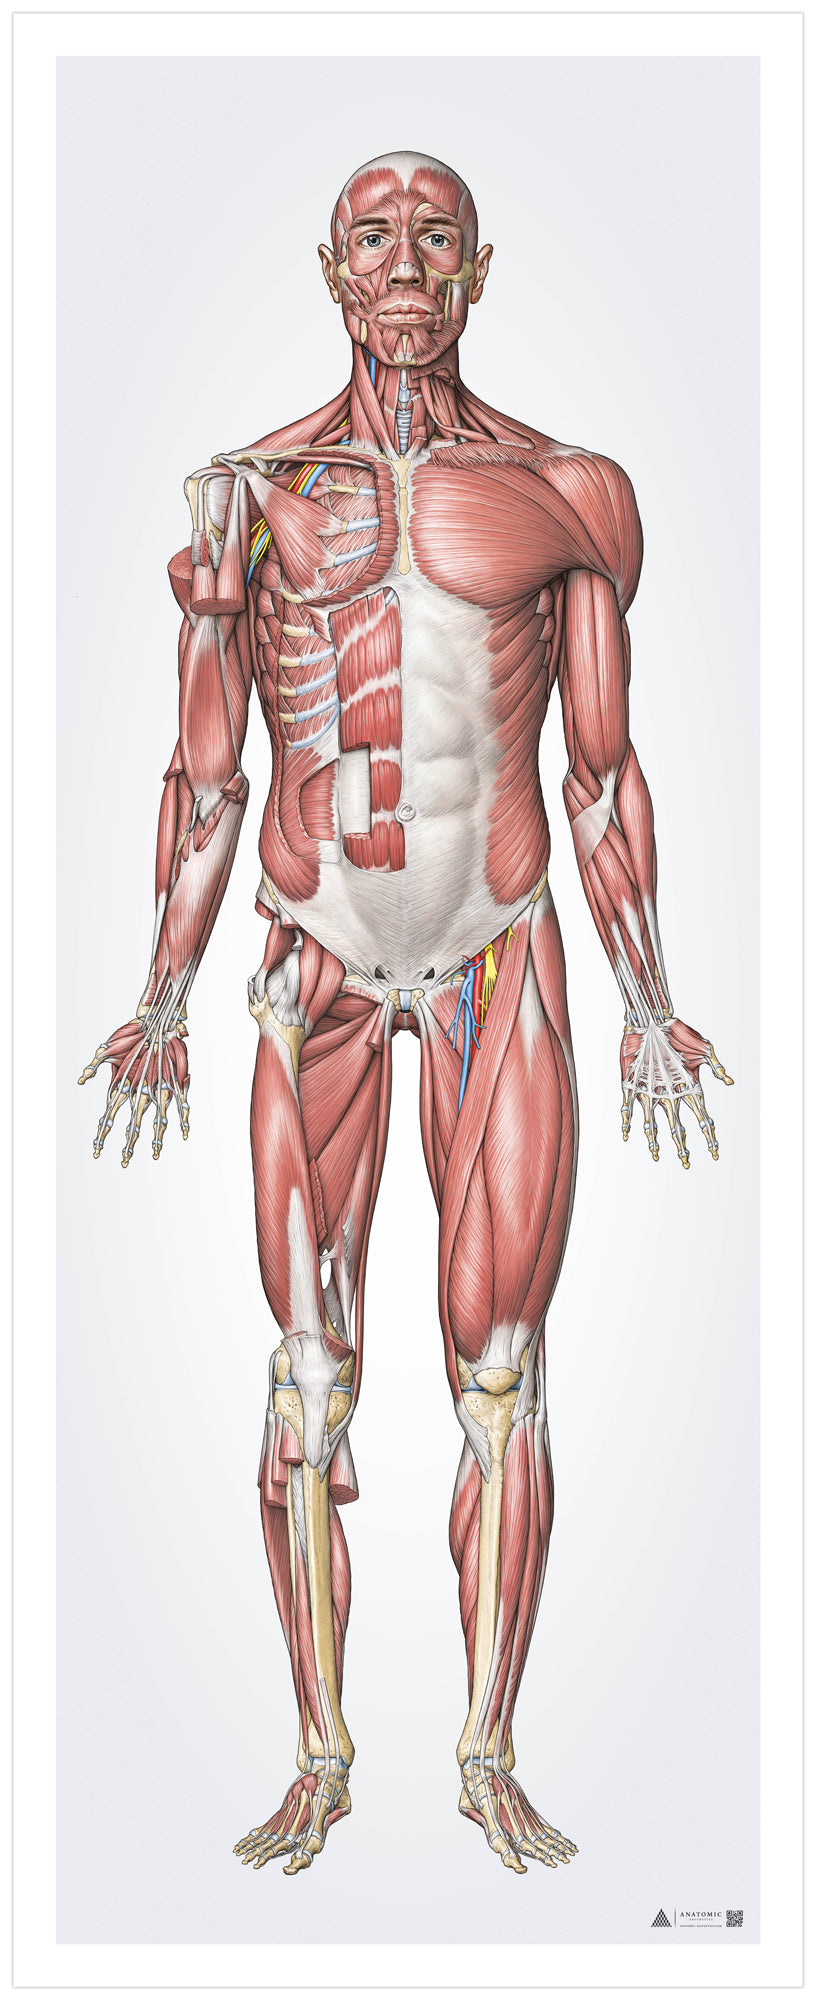 The muscular system in large format seen from the front